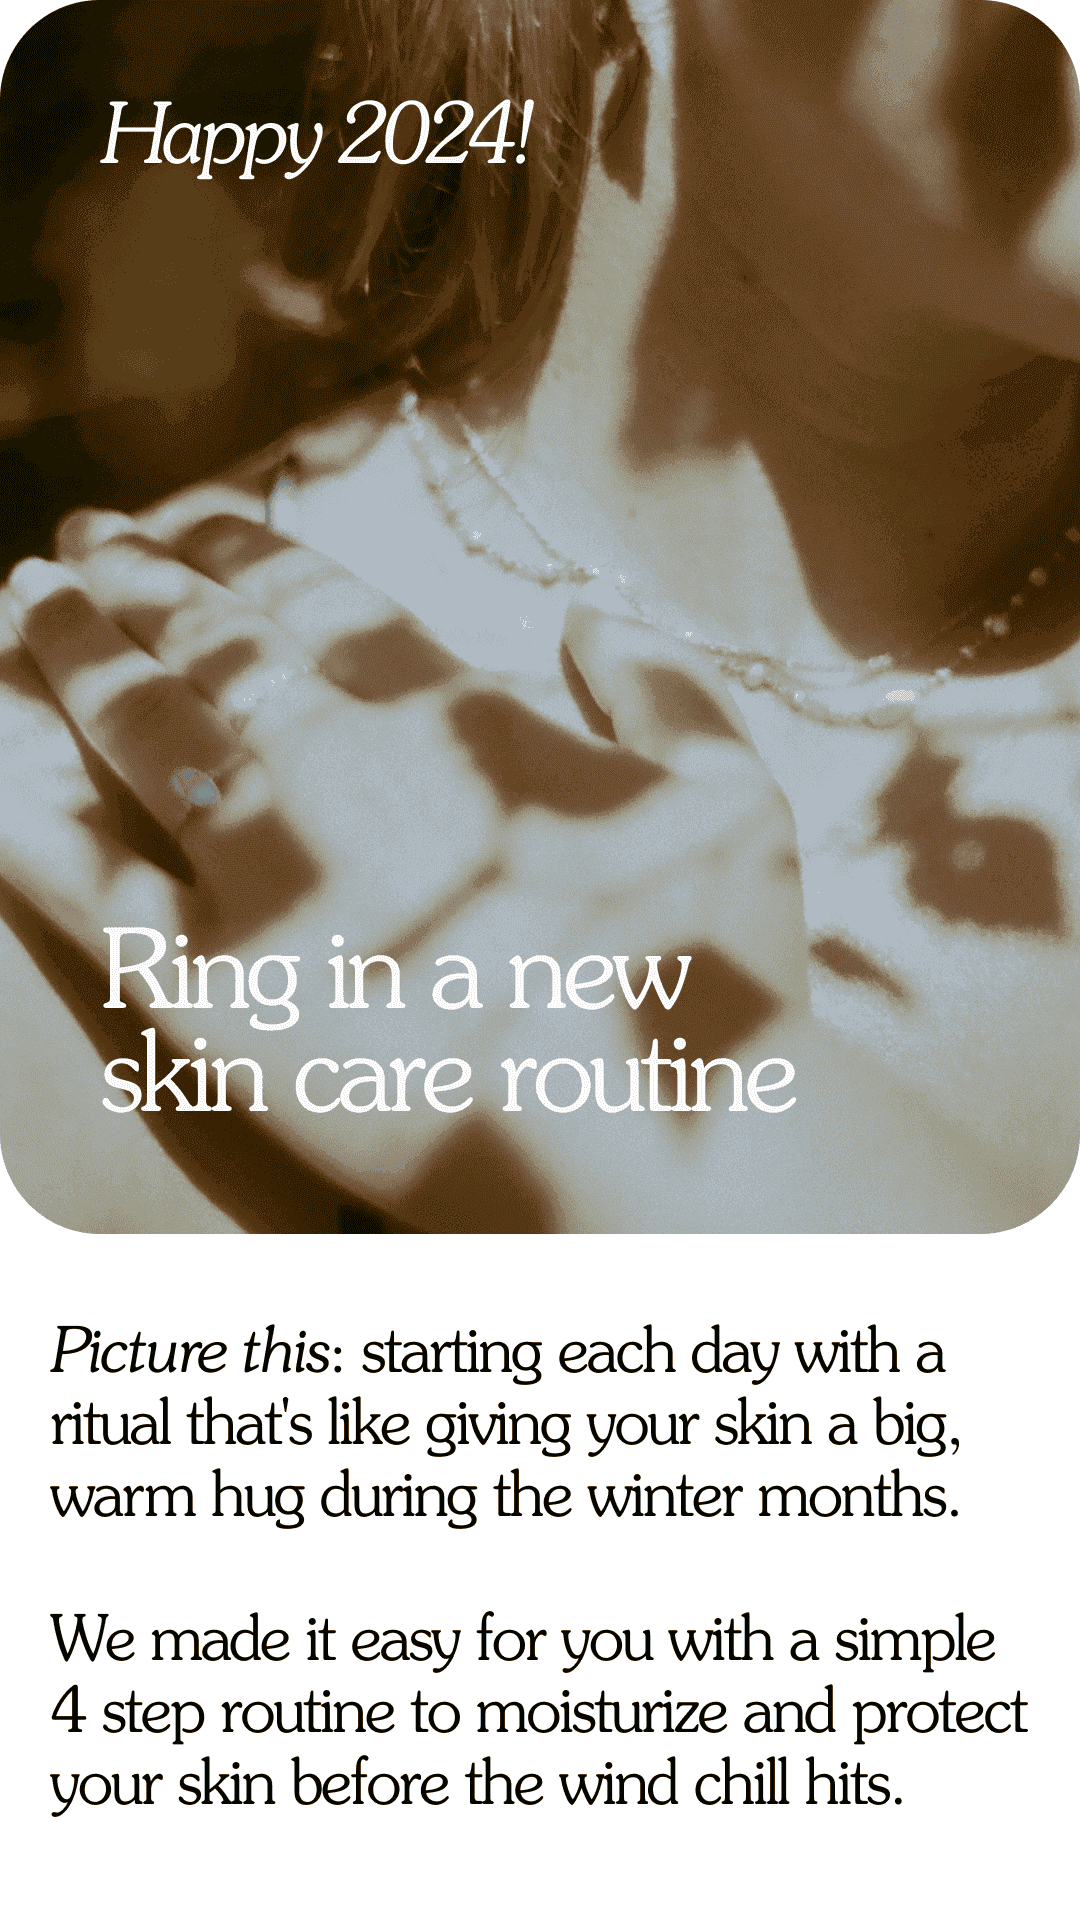 Happy 2024! Ring in a new skin care routine Picture this: starting each day with a ritual that's like giving your skin a big, warm hug during the winter months. We made it easy for you with a simple 4 step routine to moisturize and protect your skin before the wind chill hits.